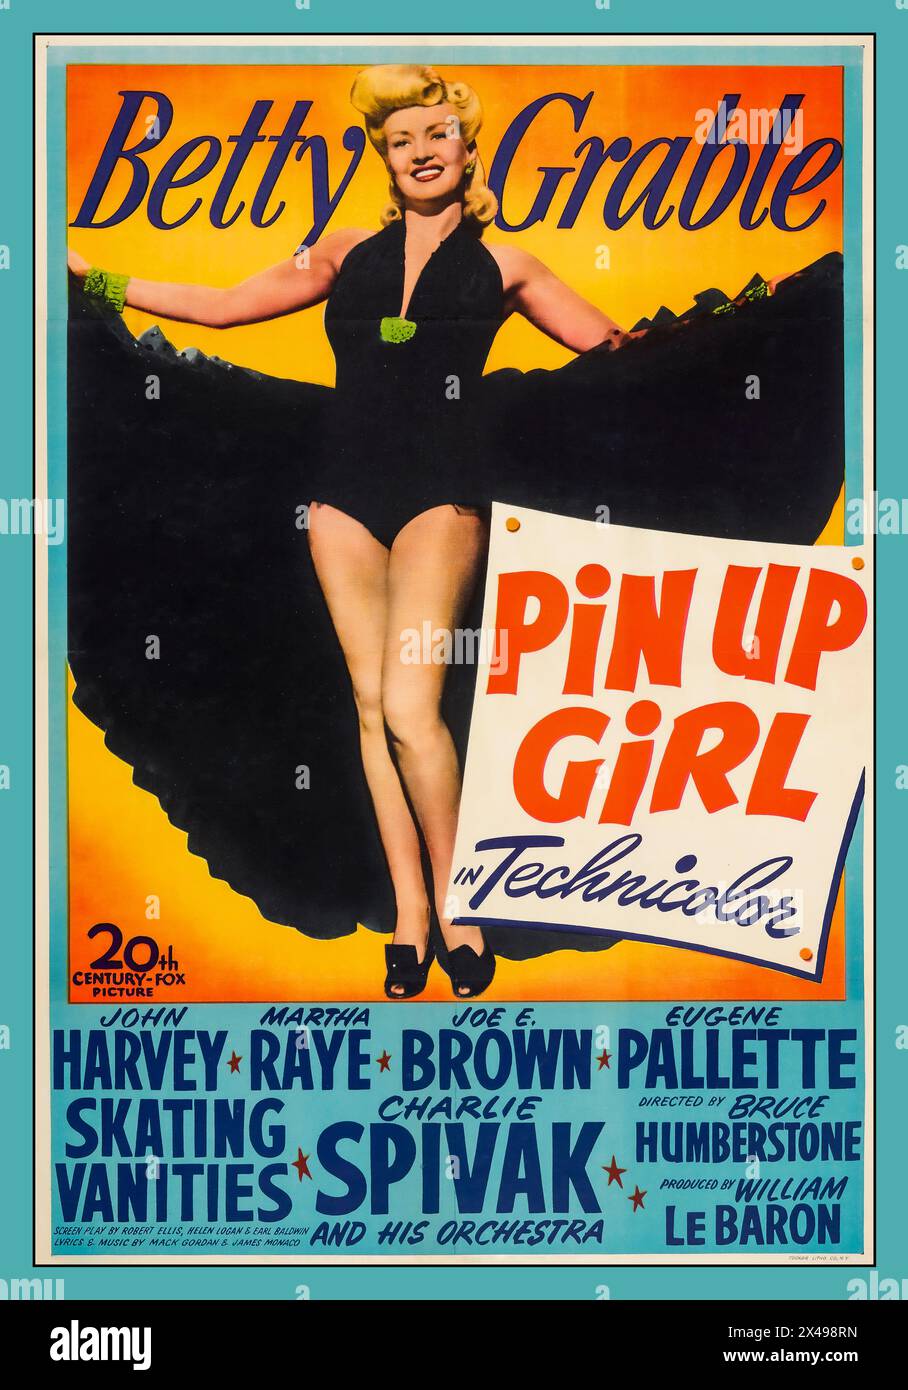 WW2 'Pin Up Girl' BETTY GRABLE vintage movie poster for a 1944 American Technicolor musical romantic comedy motion picture starring Betty Grable, John Harvey, Martha Raye, and Joe E. Brown. Directed by H. Bruce Humberstone and produced by William LeBaron, the screenplay was adapted by Robert Ellis, Helen Logan and Earl Baldwin based on a short story titled Imagine Us! (1942) by Libbie Block. Pin Up Girl capitalized on Grable's iconic pin-up status during World War II, even using her famous swimsuit photo in some parts of the movie. Stock Photo